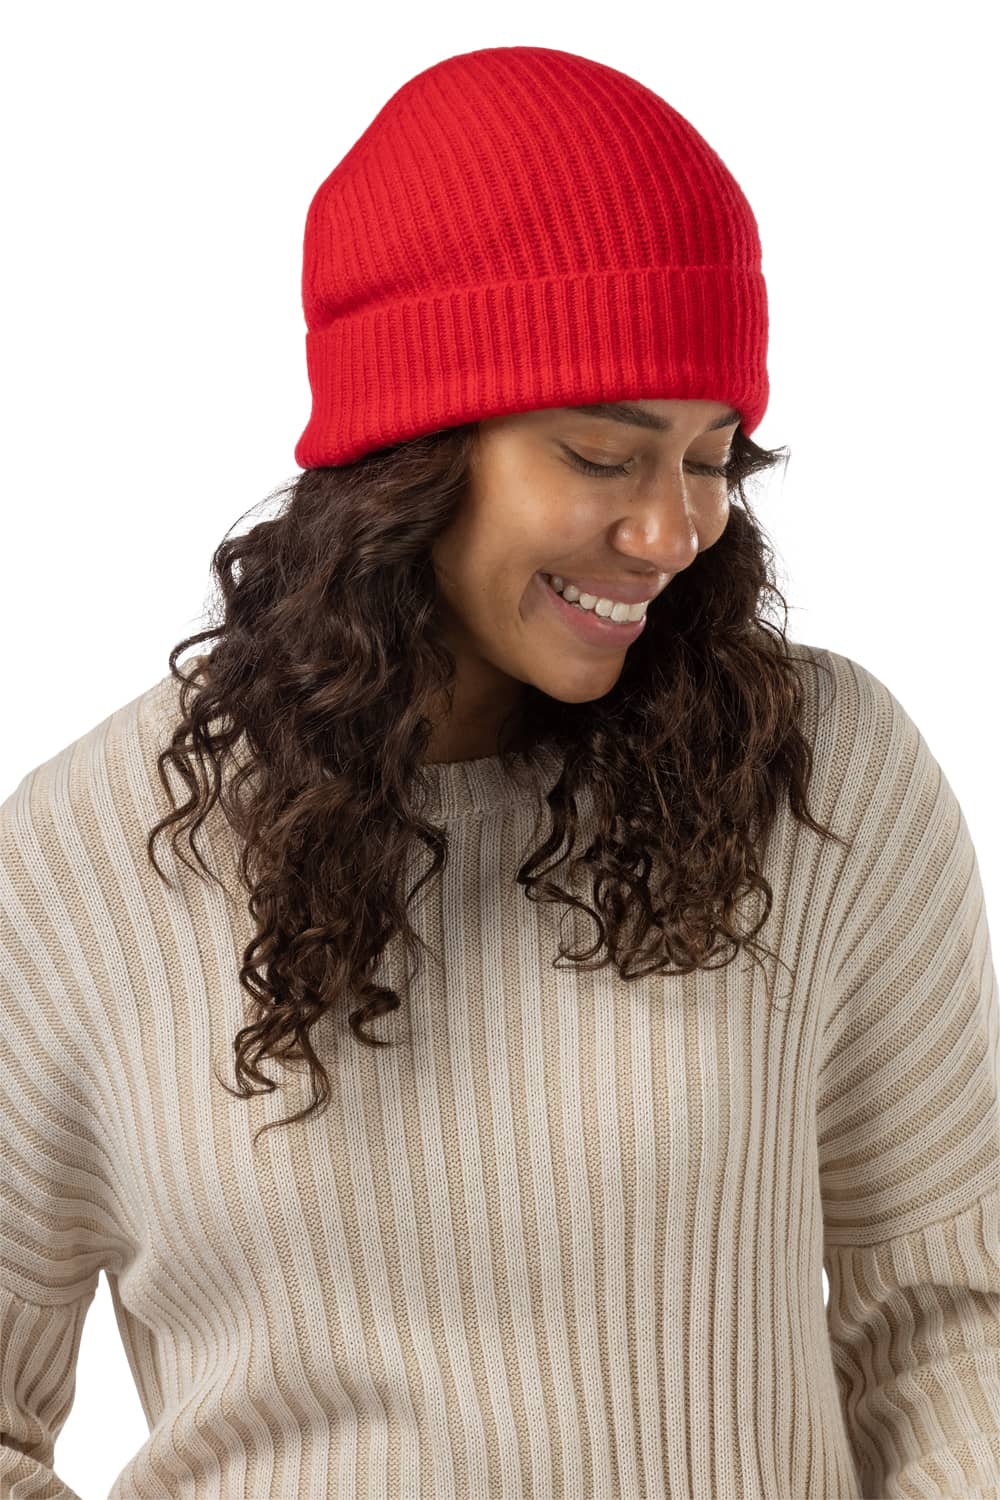 Women's 100% Pure Cashmere Ribbed Hat with Cuff Womens>Accessories>Hat Fishers Finery Cardinal Red One Size Fits Most 